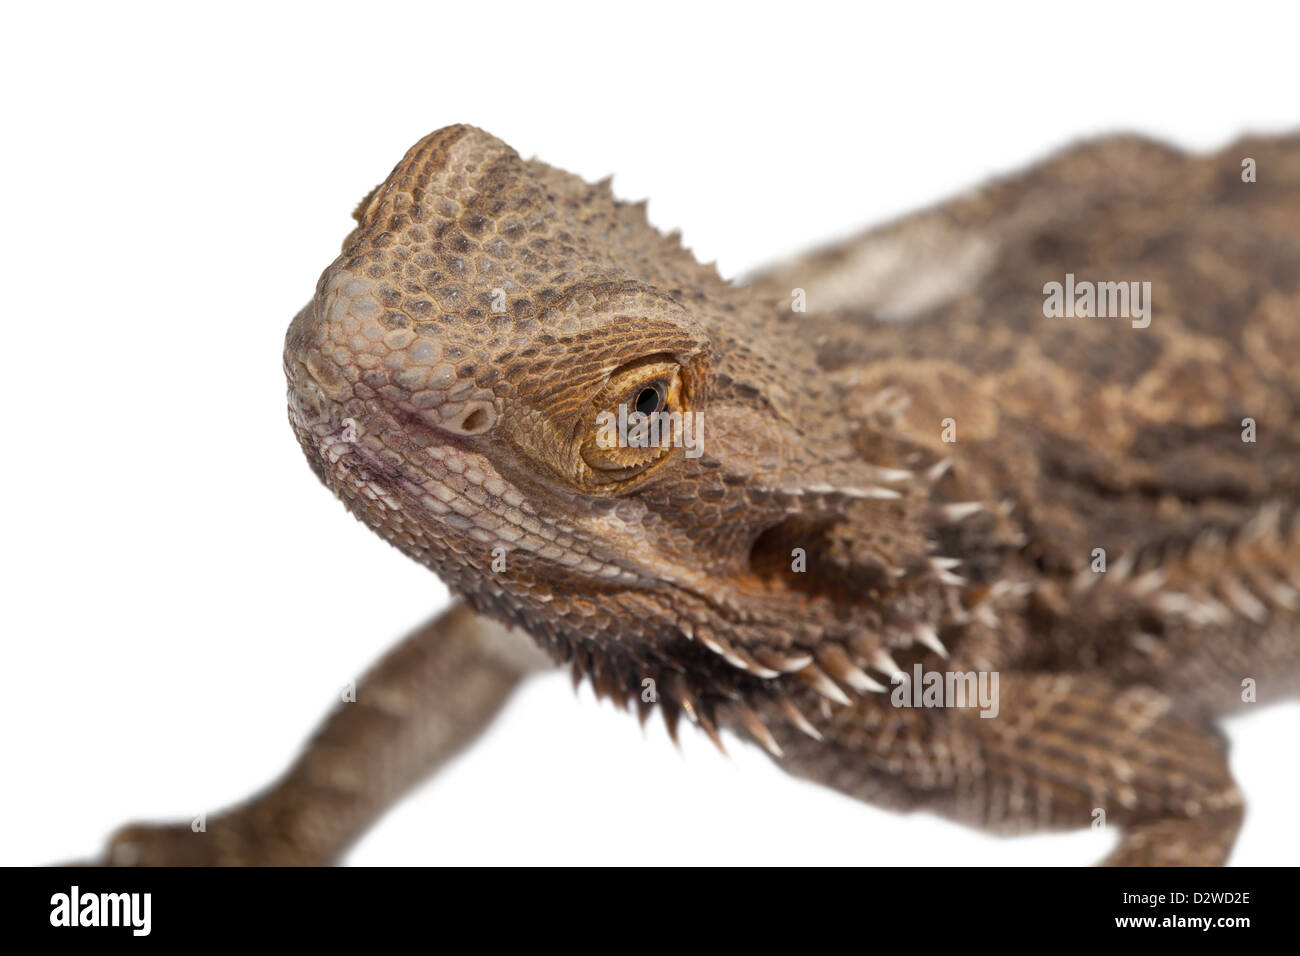 A cute bearded Dragon close up, looking at the camera. Stock Photo